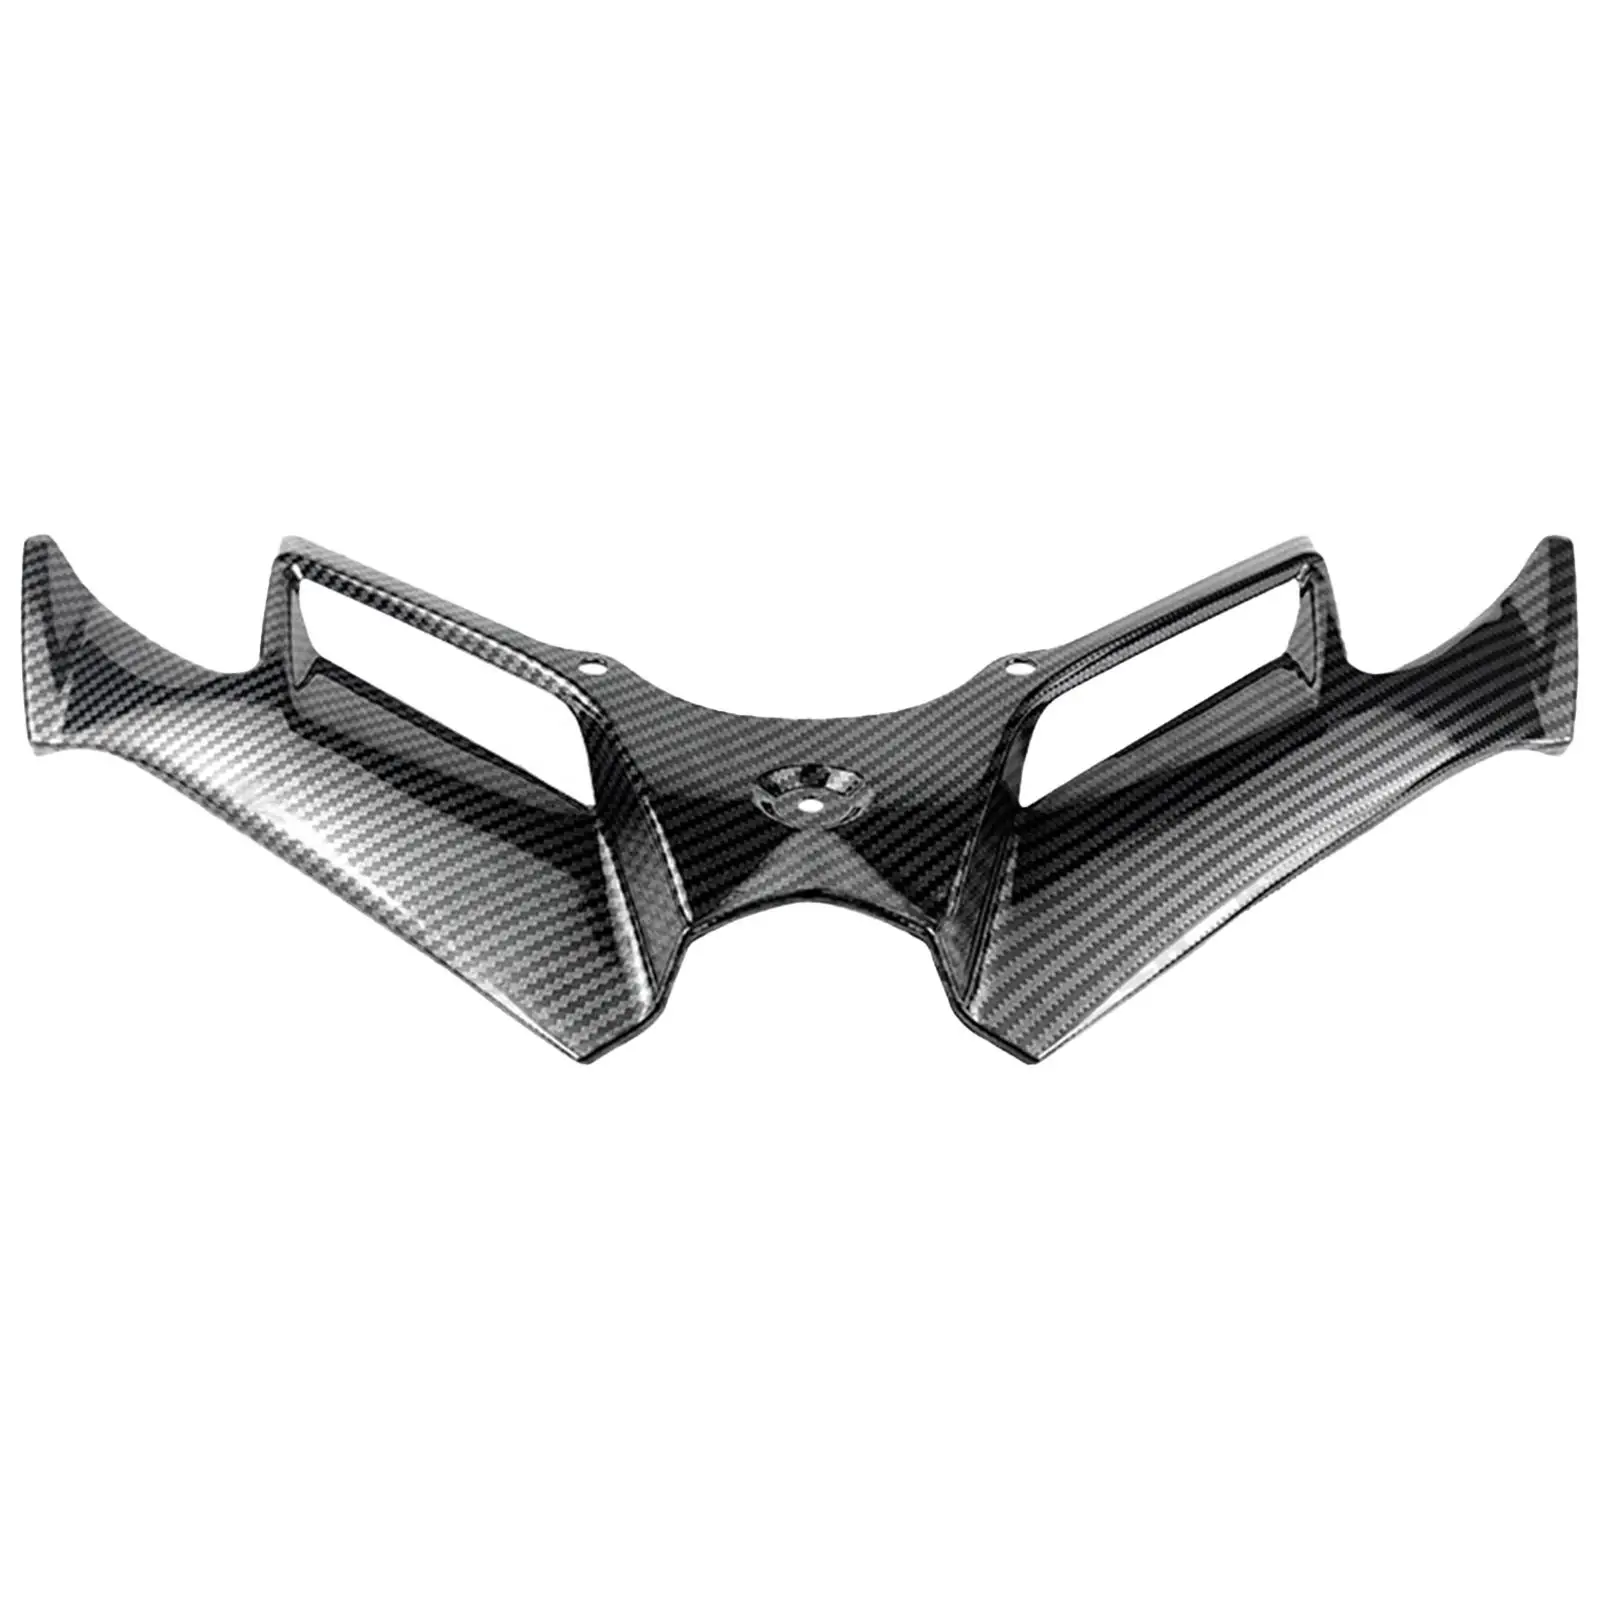 Motorcycle Front Aerodynamic Wing Cover Trim Stylish for Yamaha Nmax155